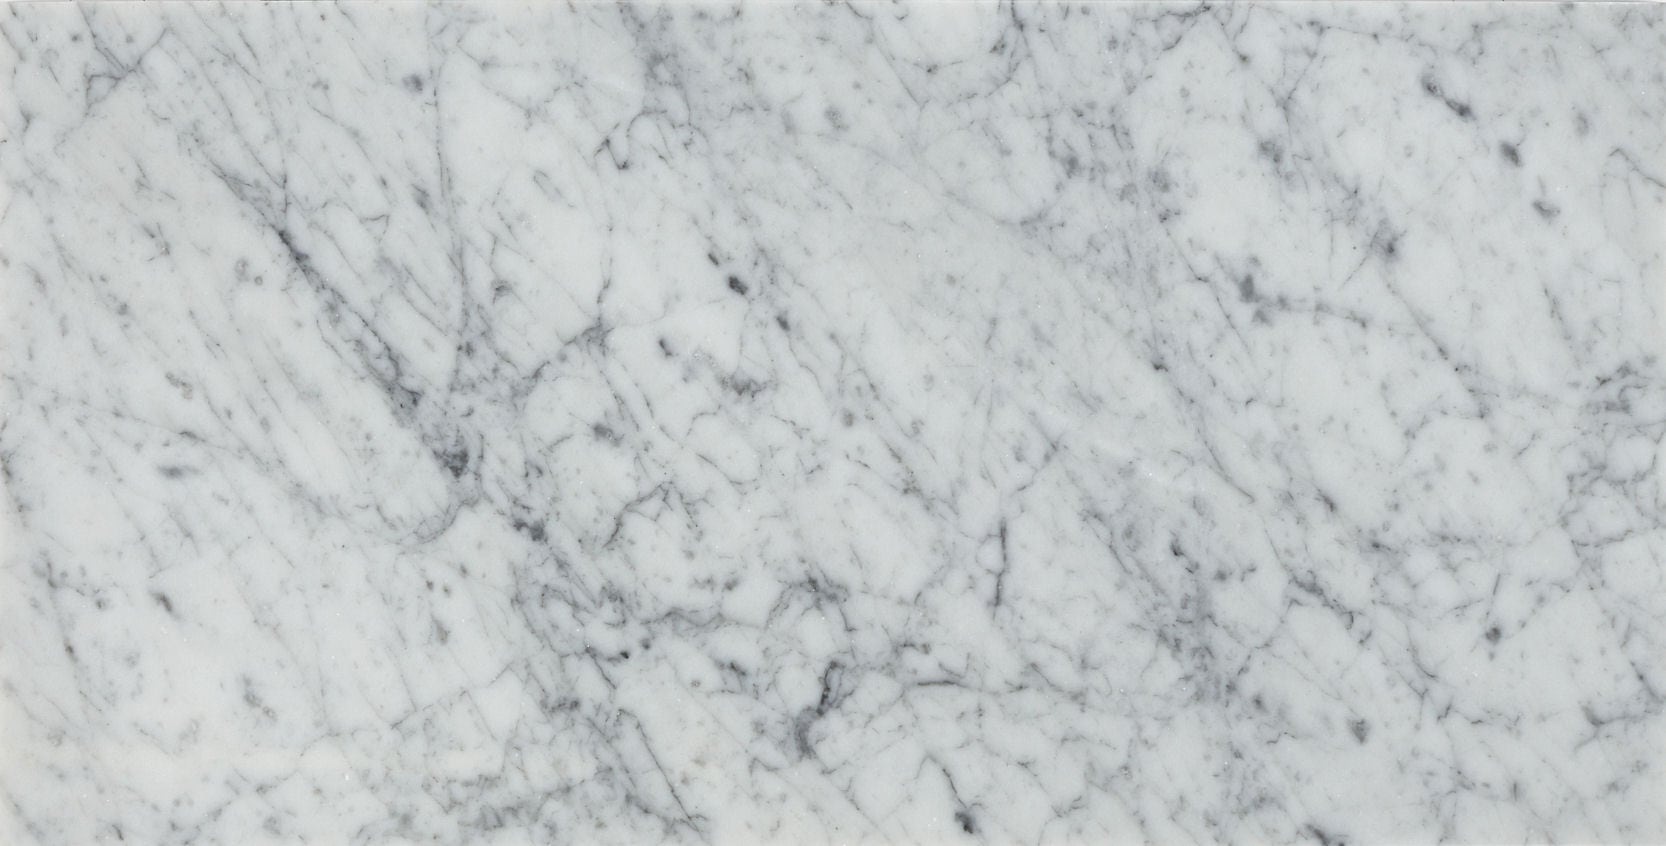 Is Marble The Best Option For Me?